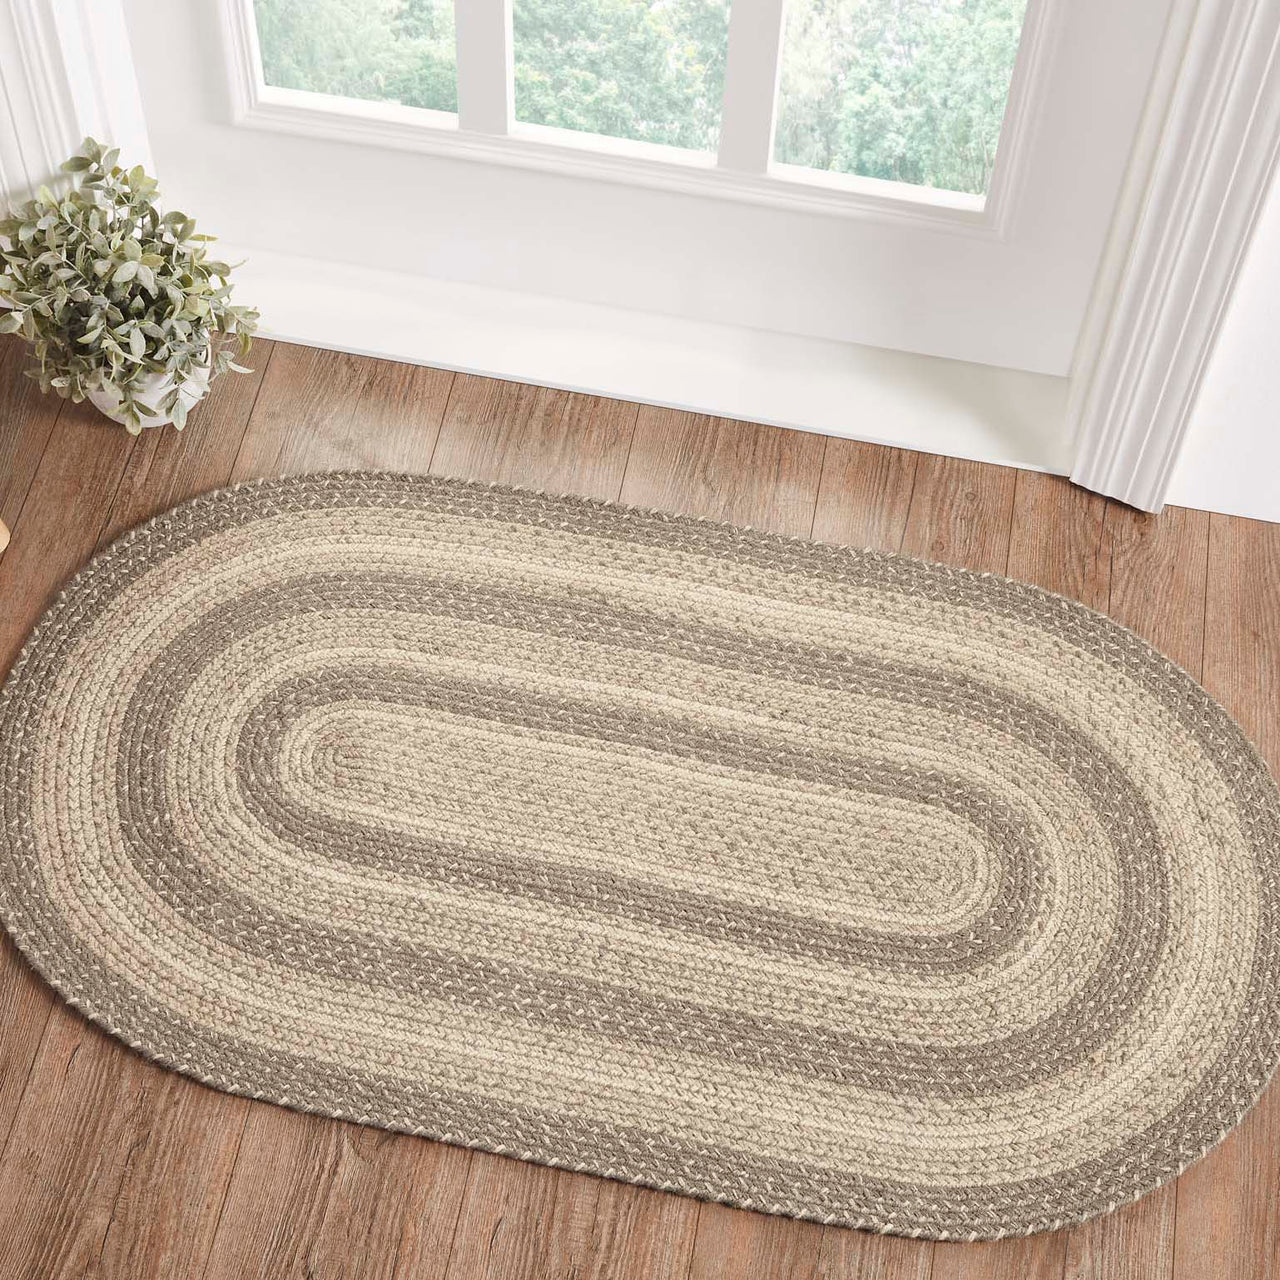 Cobblestone Jute Braided Oval Rug with Rug Pad 27"x48" VHC Brands